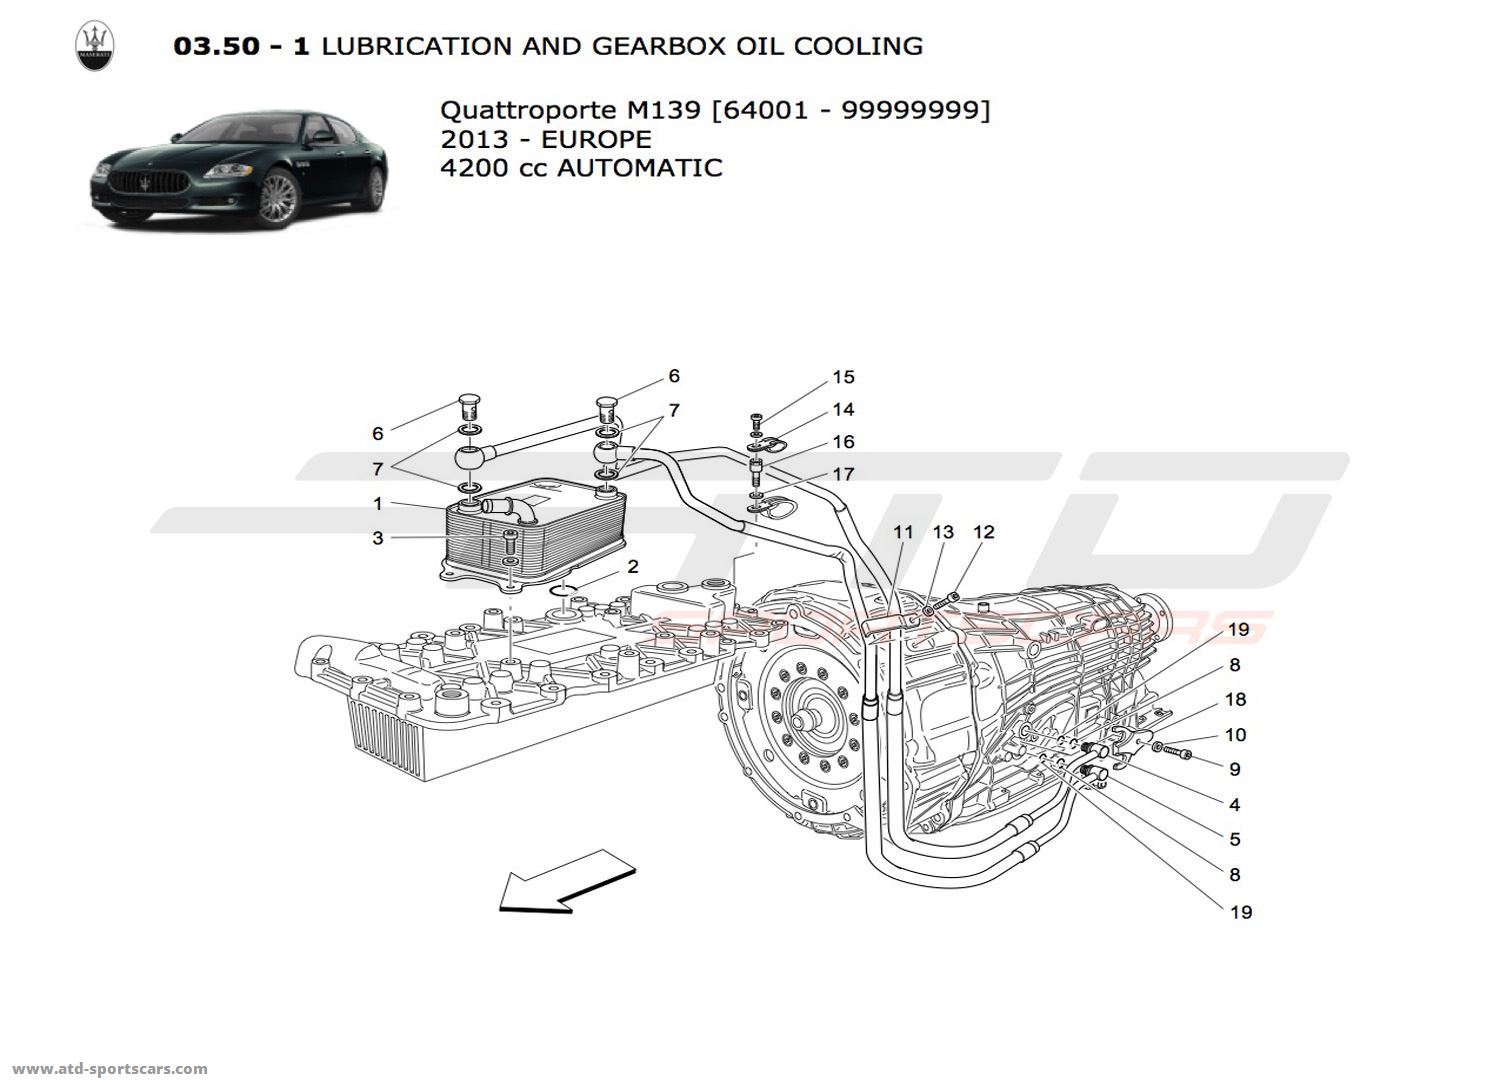 LUBRICATION AND GEARBOX OIL COOLING